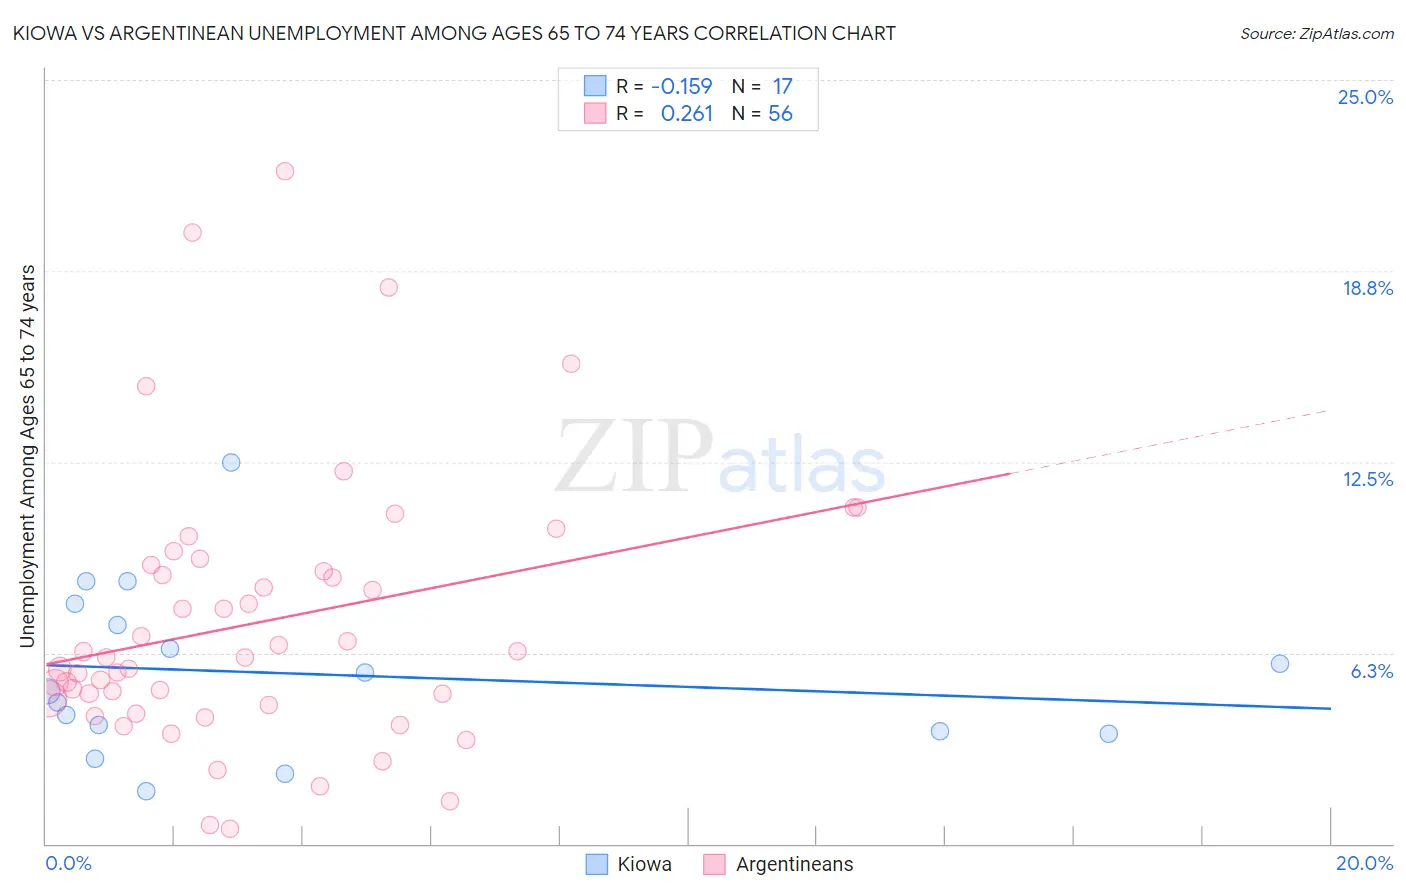 Kiowa vs Argentinean Unemployment Among Ages 65 to 74 years